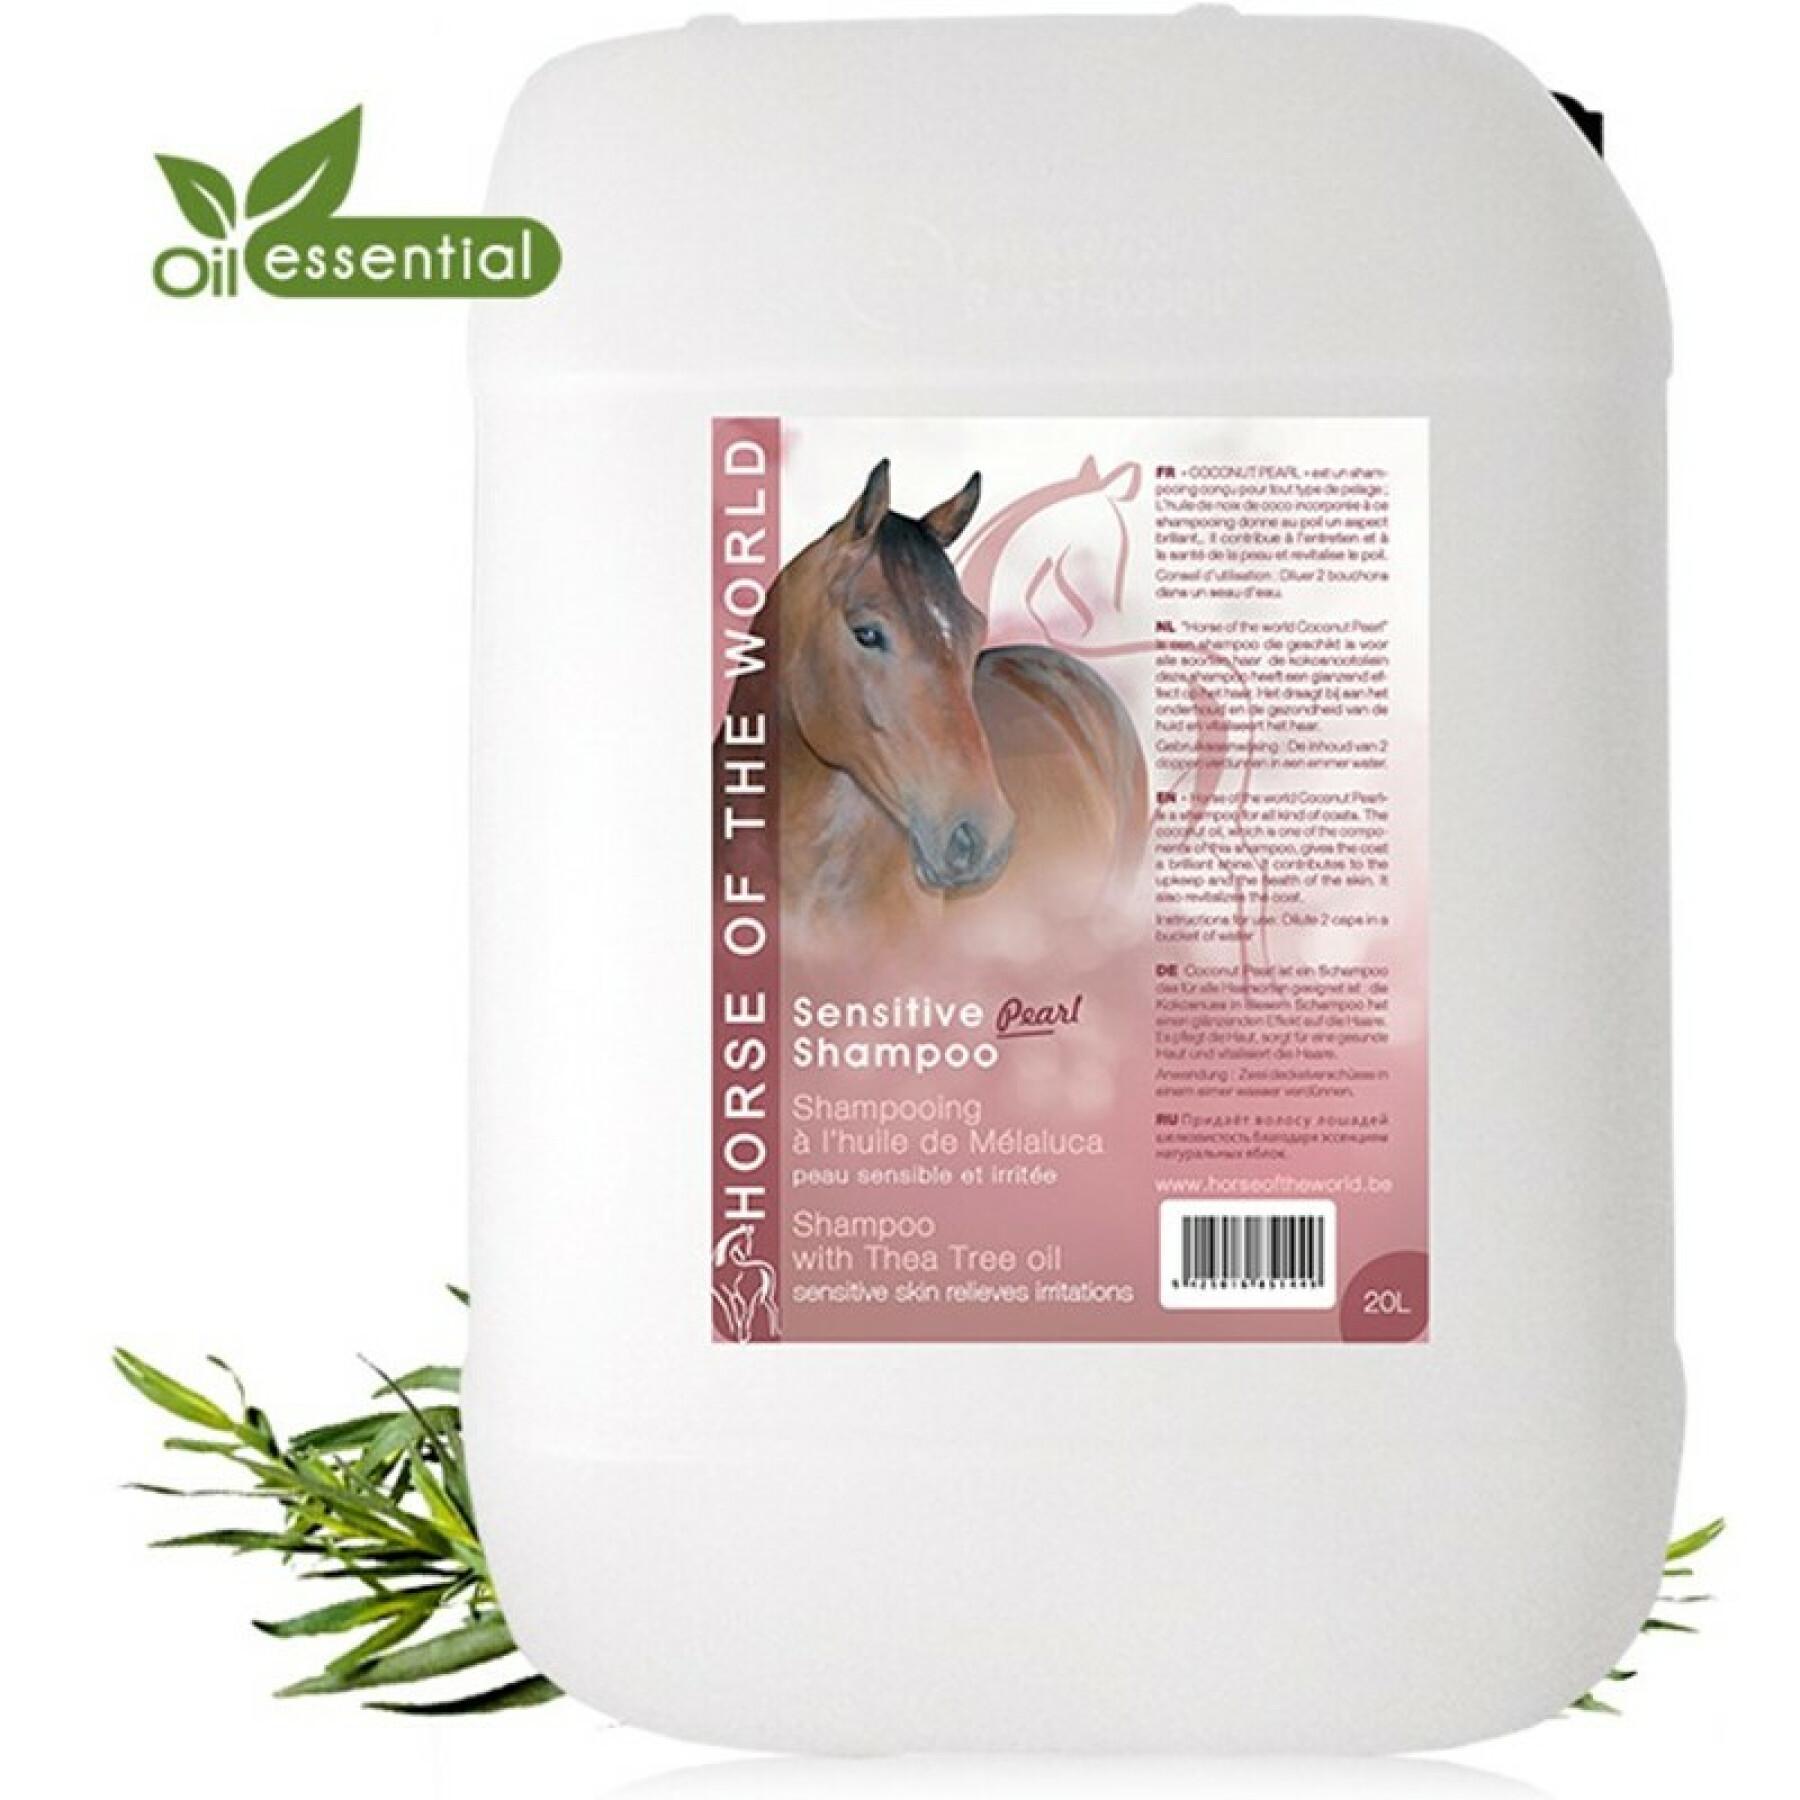 Soothing shampoo pearl Horse Of The World 20 l [Taille 20 l]